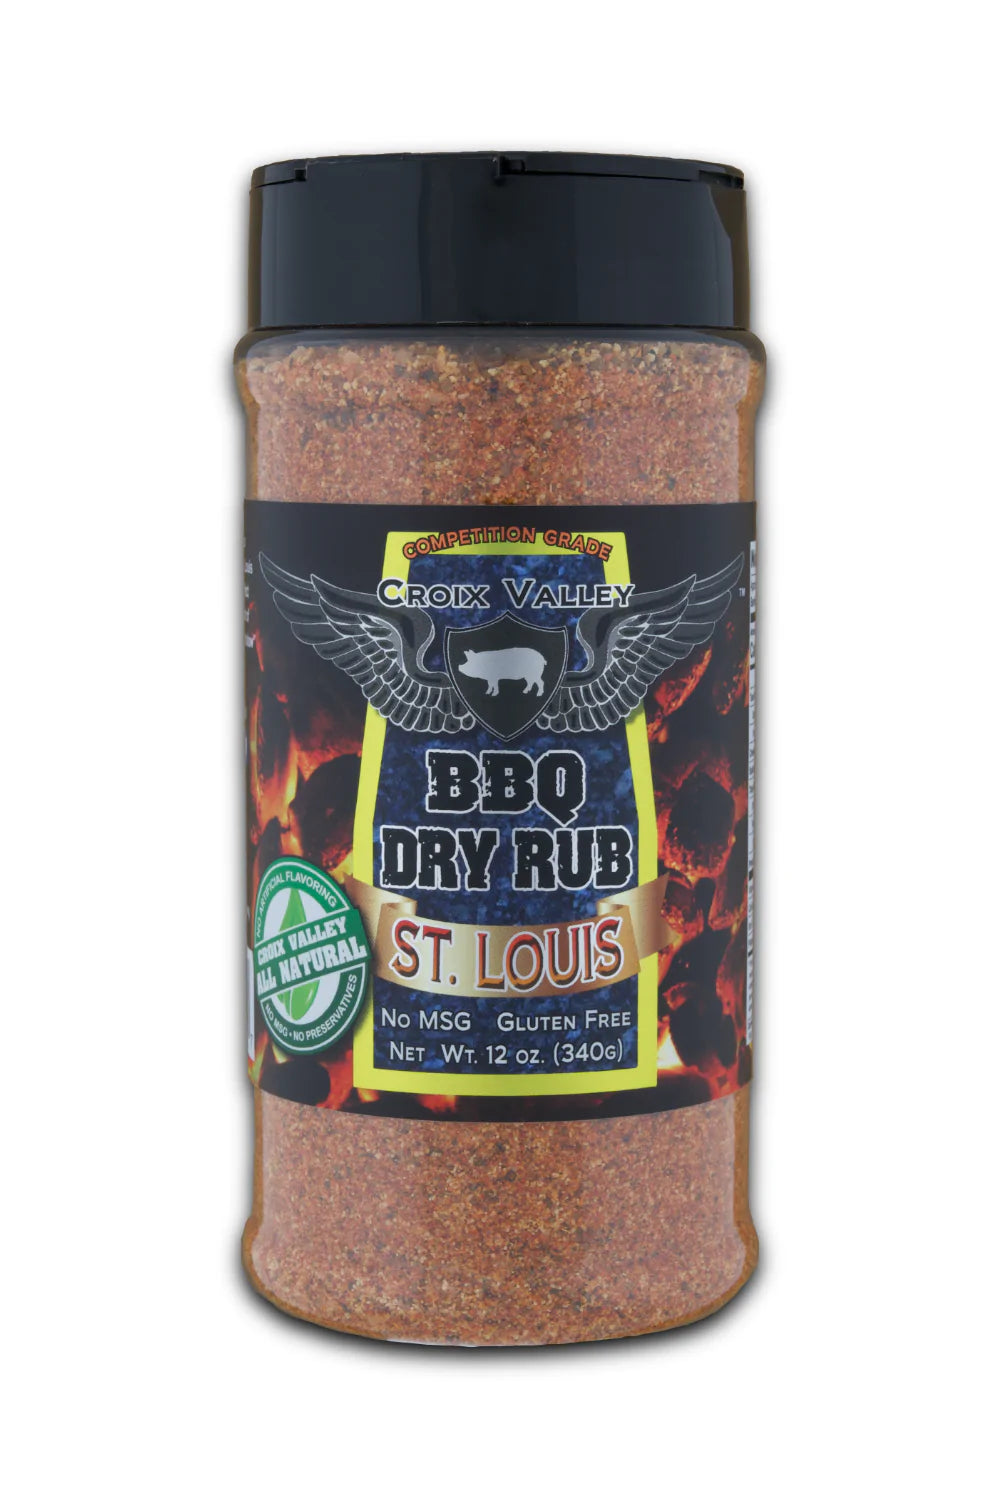 St. Louis Dry Rub by Croix Valley